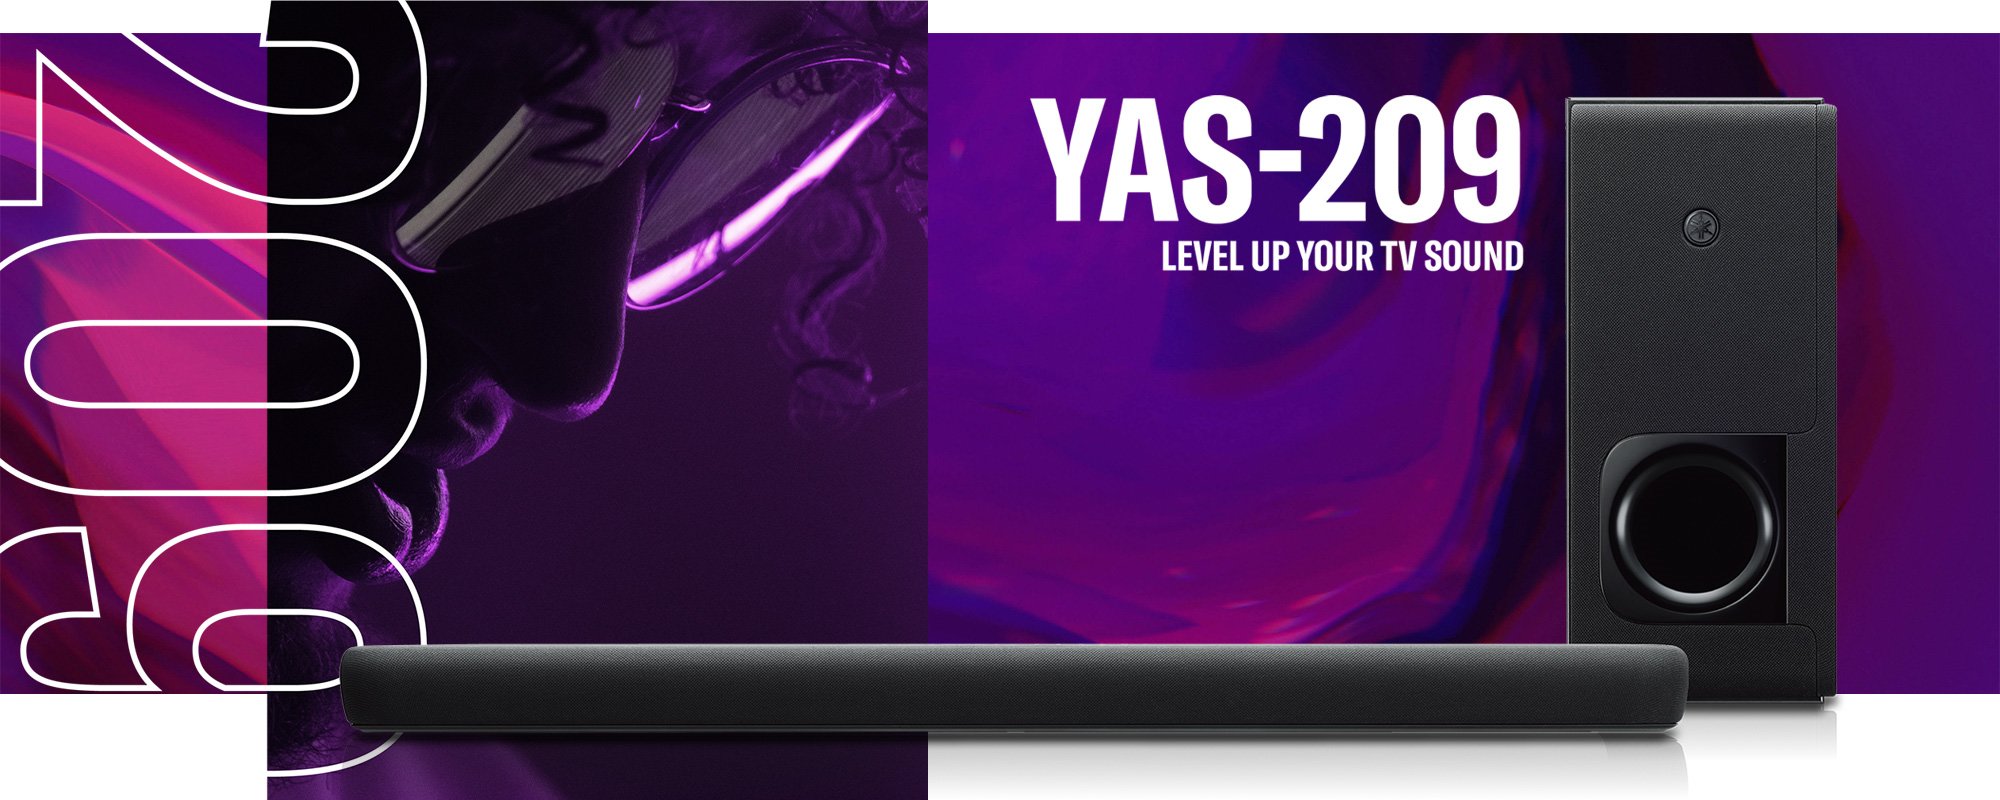 YAS-209 - Overview - Sound Bars - Audio & Visual - Products